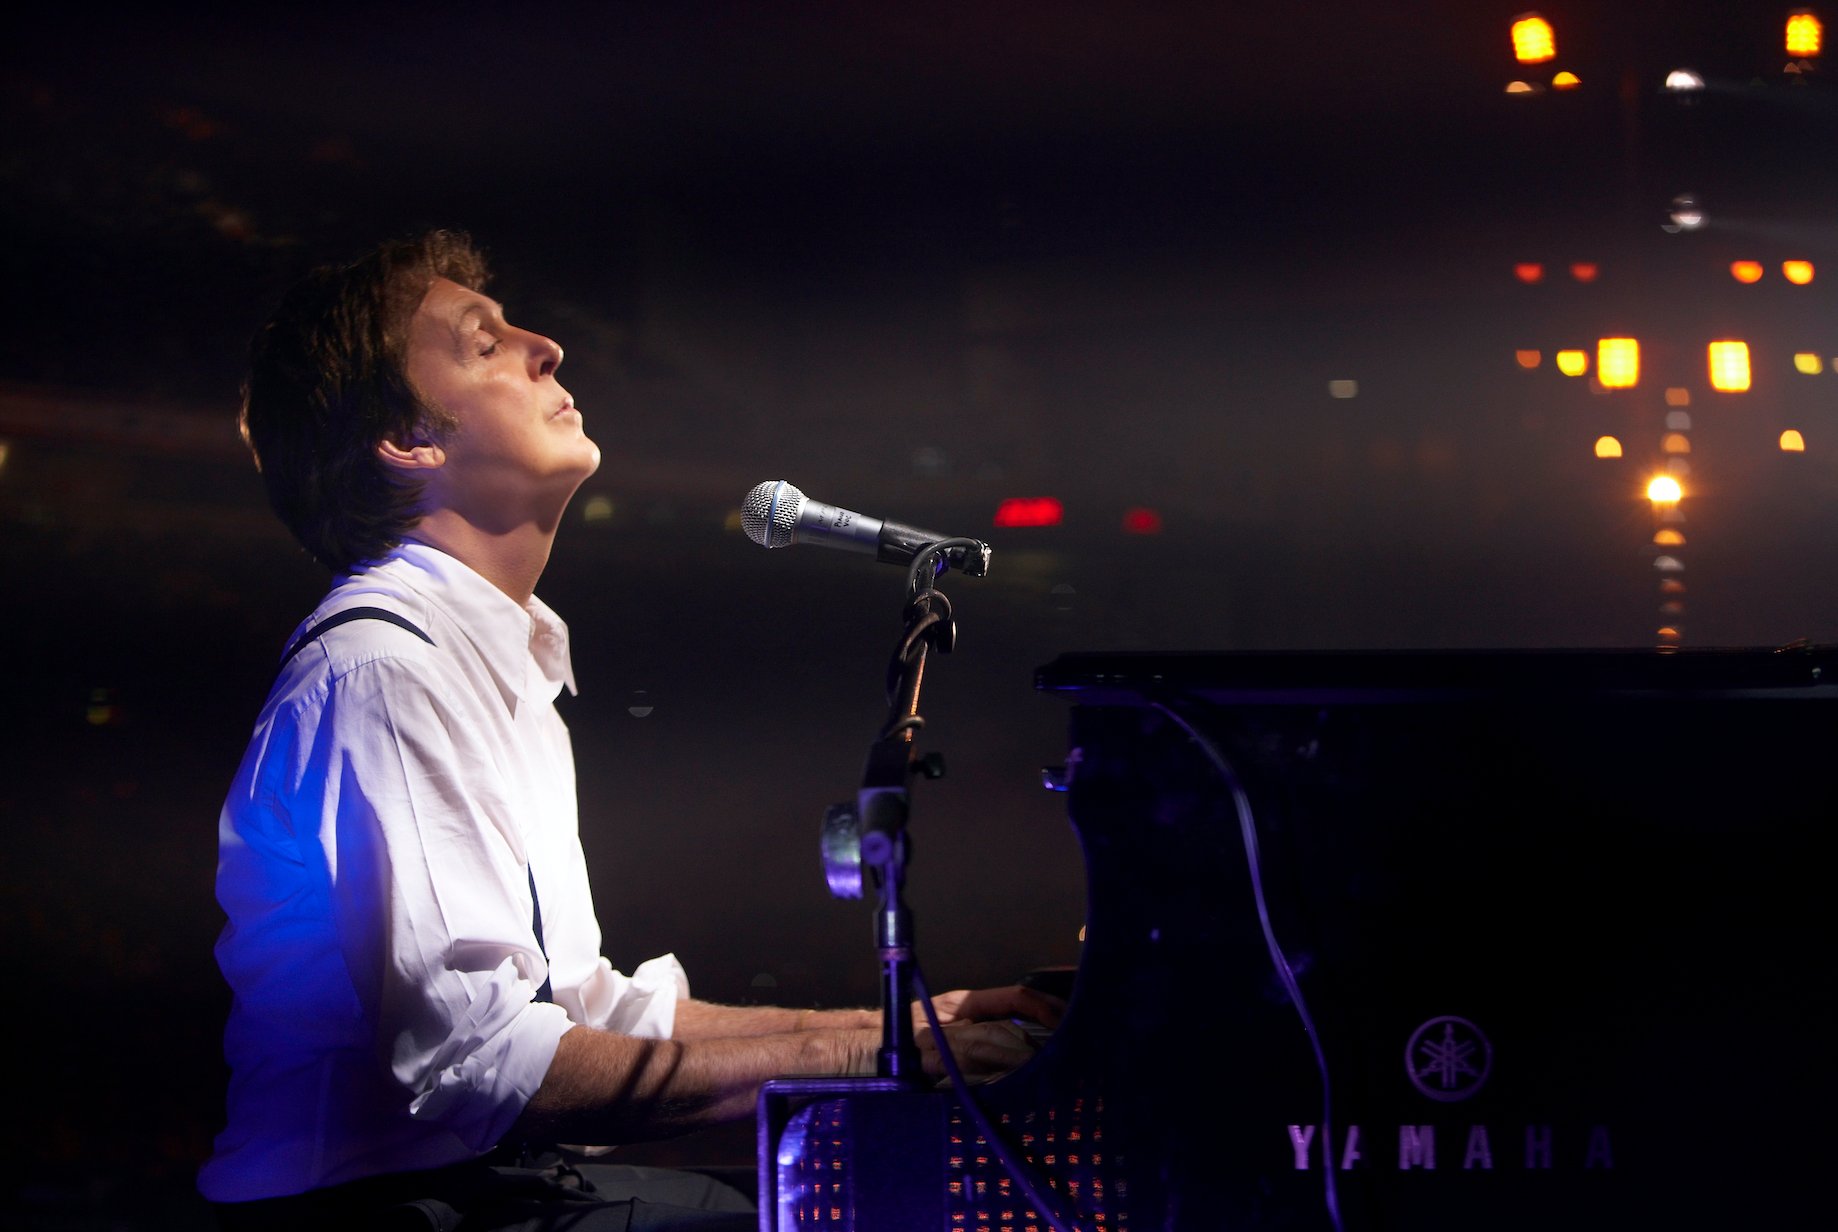 Paul McCartney plays piano at the Liverpool Sound concert in 2008